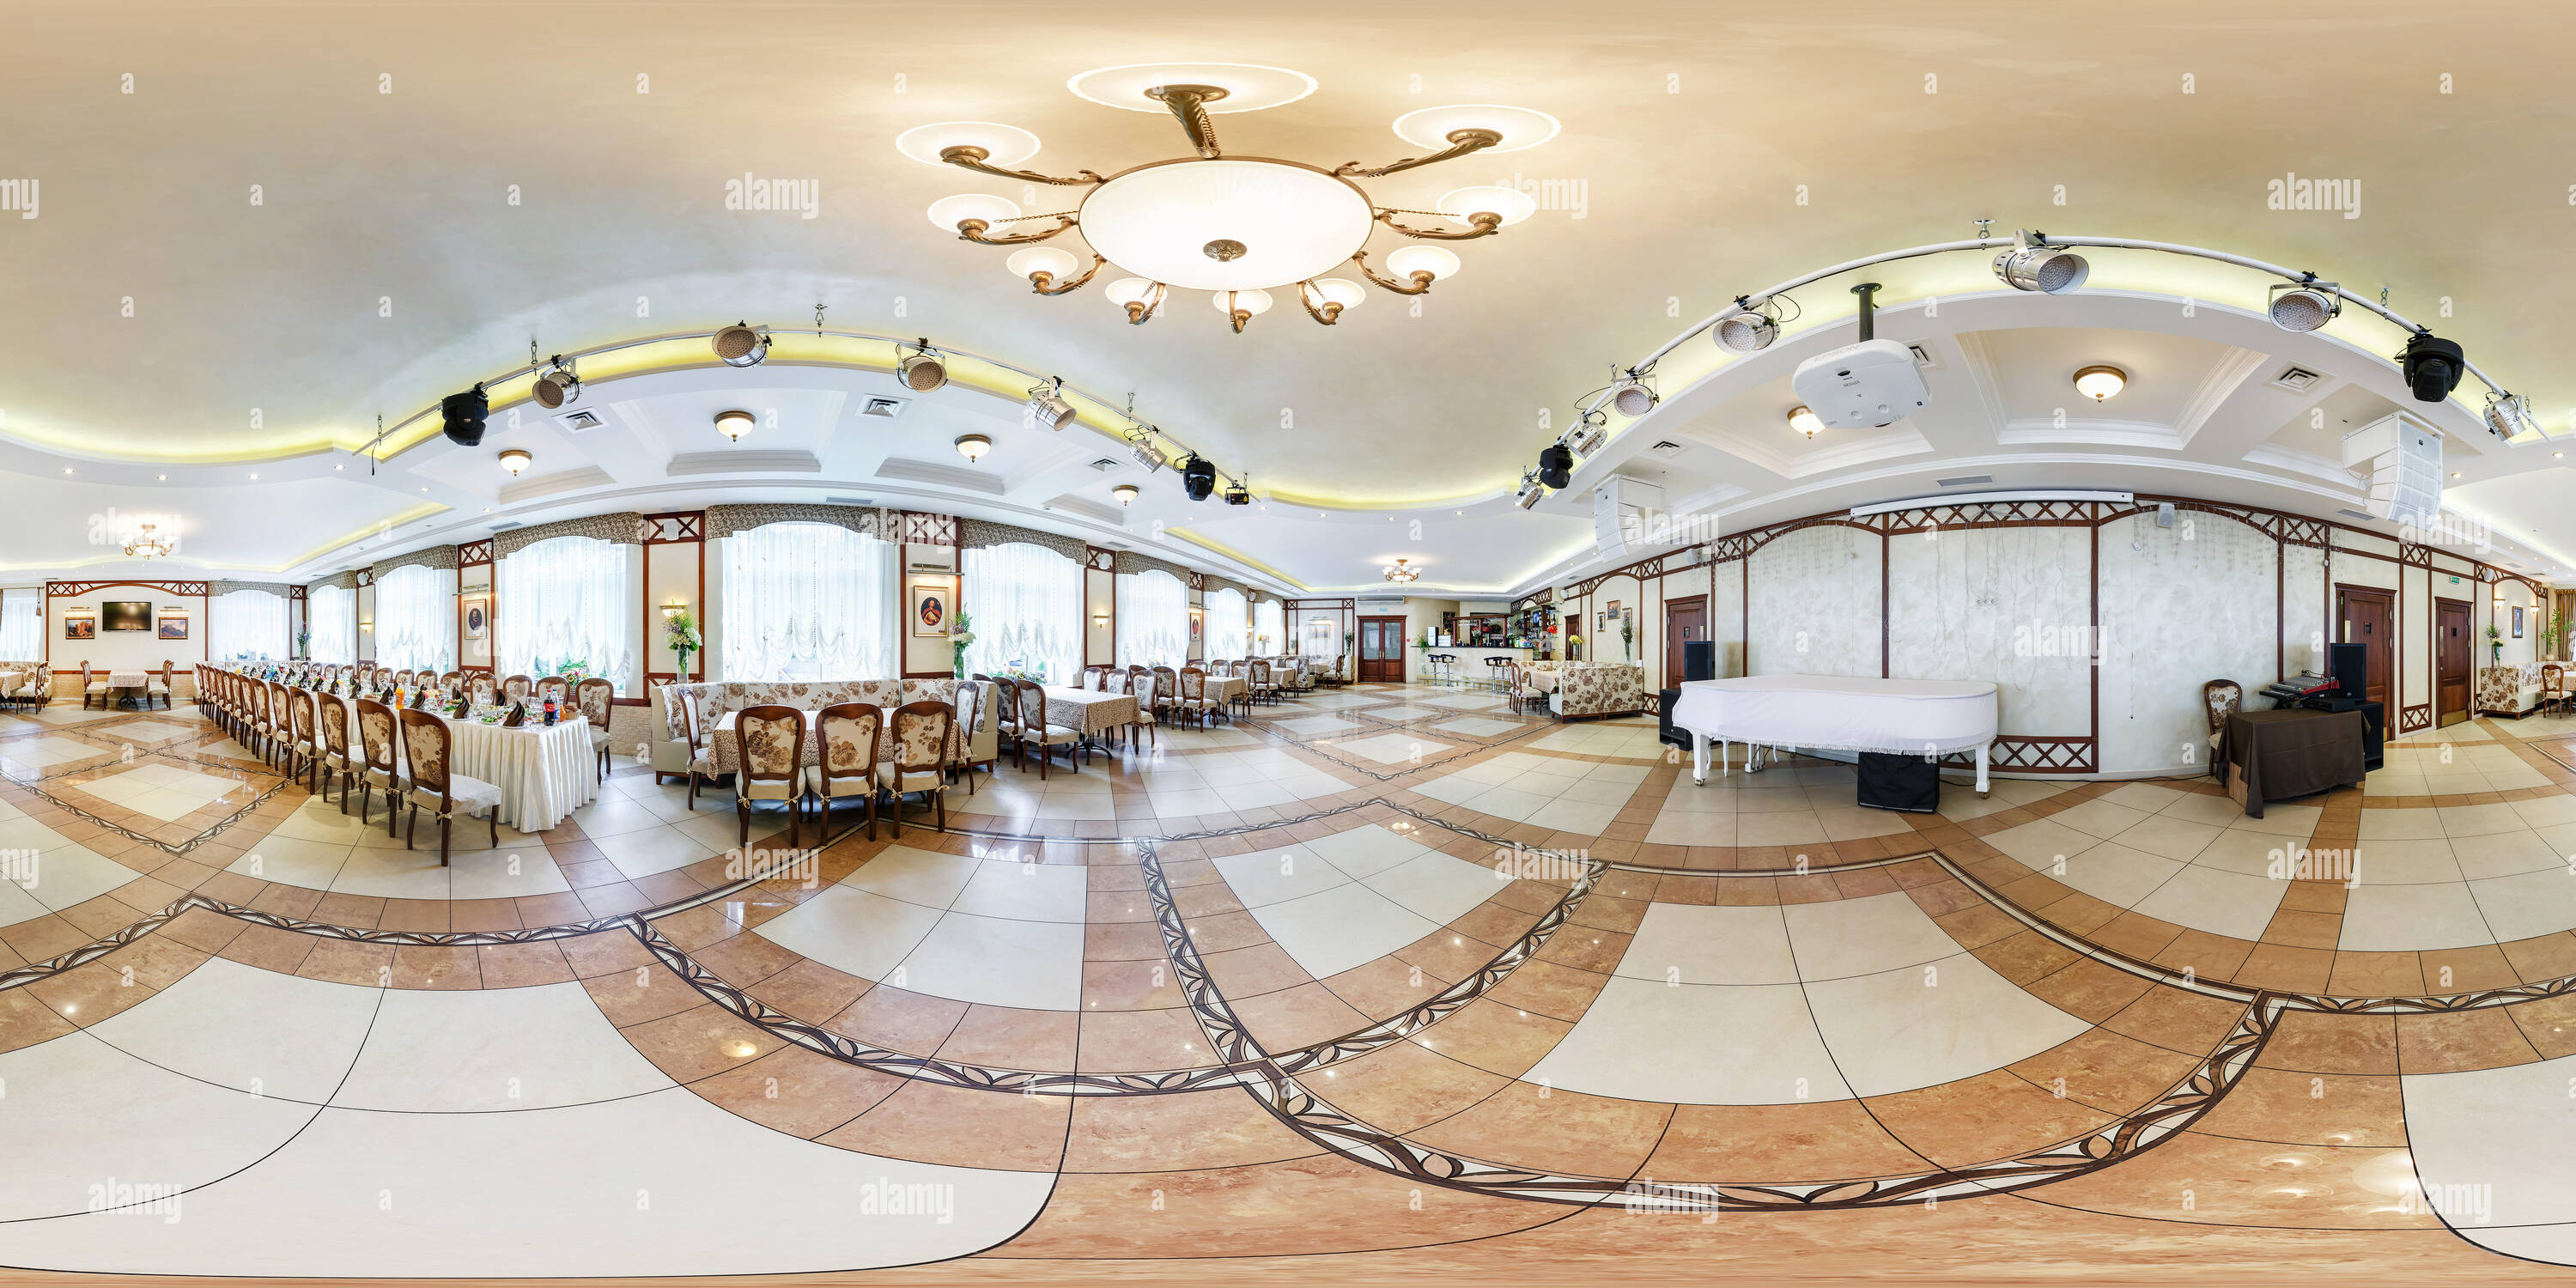 360 degree panoramic view of MINSK, BELARUS - JULY 15, 2014: Modern interior of gourmet restaurant with light style with white grand piano,  full 360 by 180 degree seamless panora